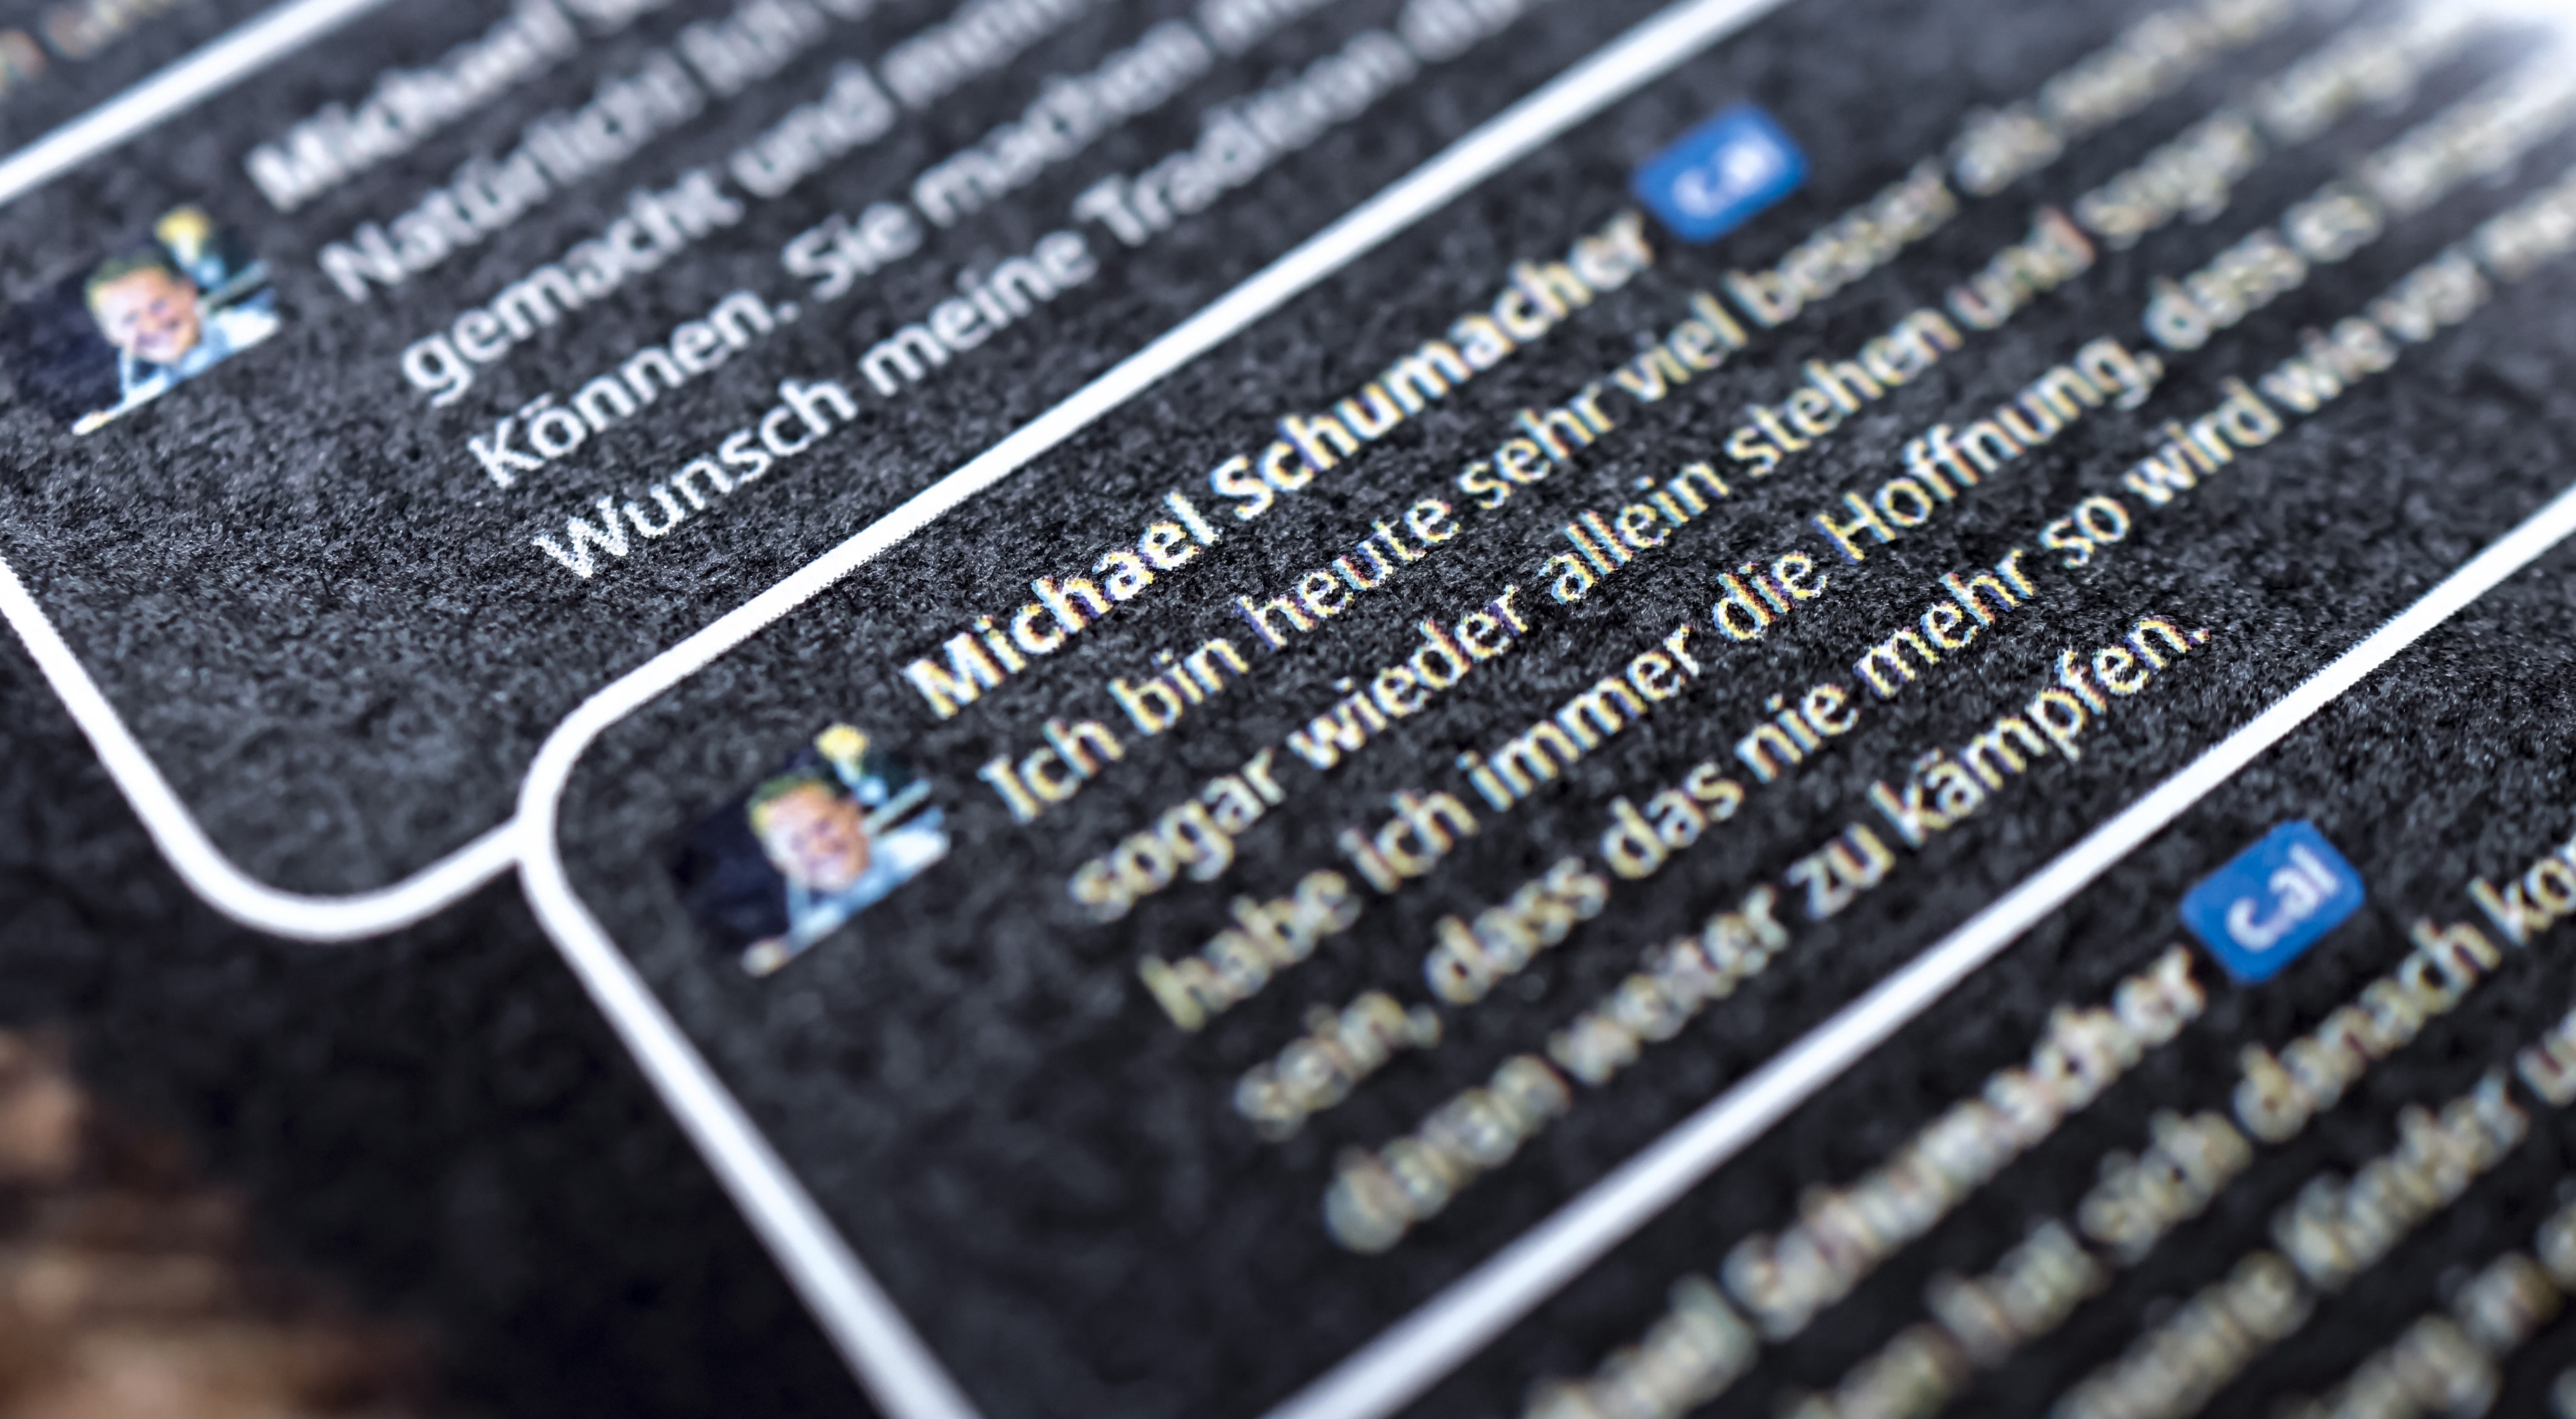 An edition of German weekly magazine Die Aktuelle, which features a fake interview with Michael Schumacher, is seen in Berlin, Germany, on April 20. The interview was generated by an AI chatbot. As these chatbots become more mainstream, we can expect more problems with potential bias, misinformation, and controversial content. Photo: EPA-EFE